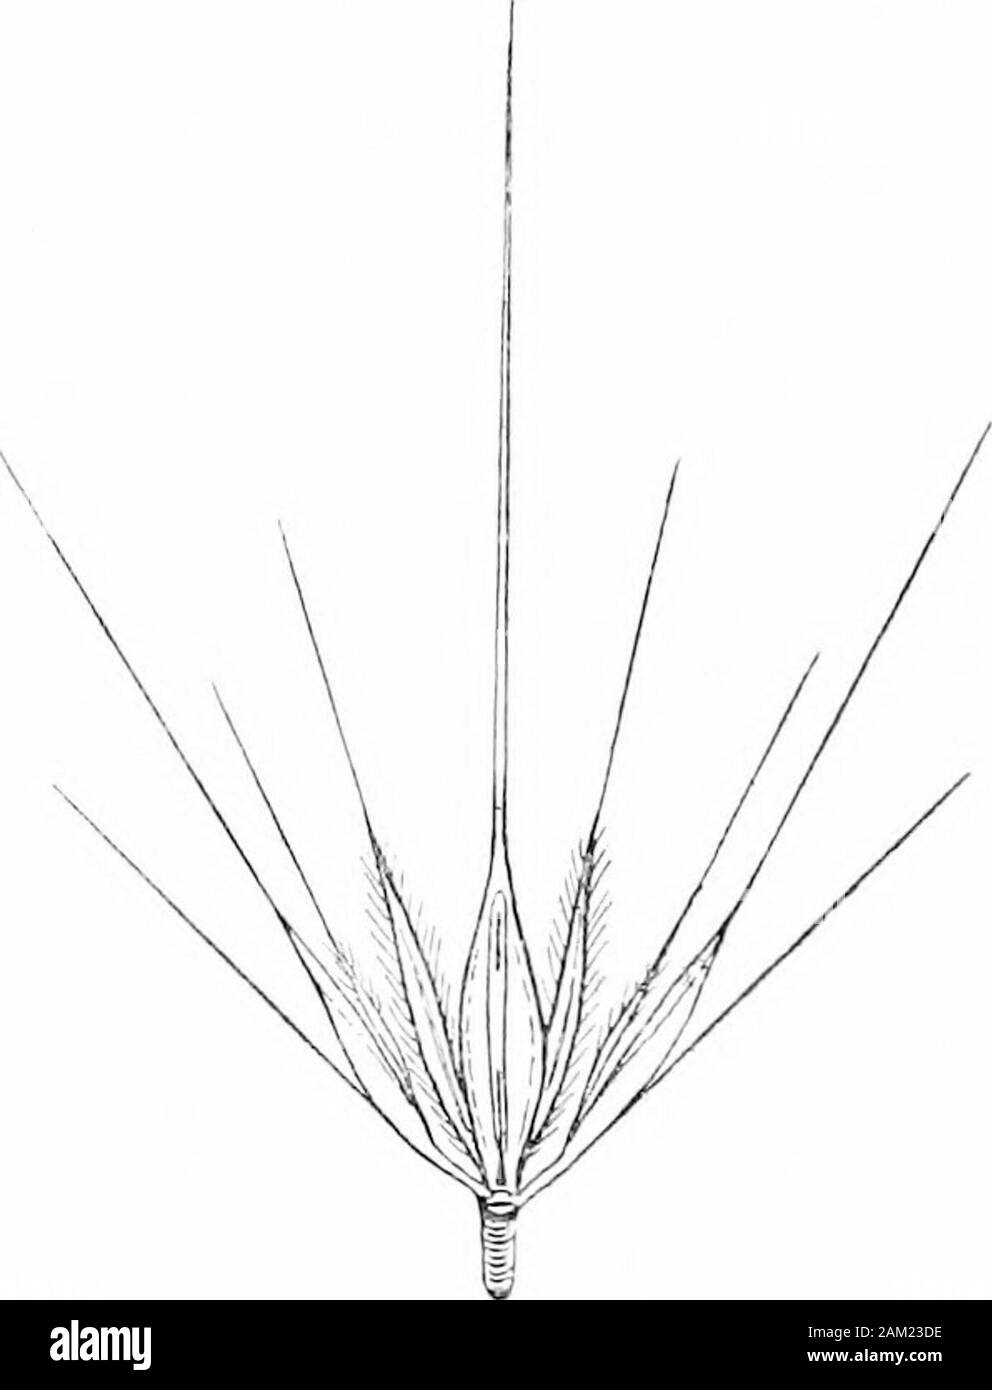 British grasses and their employment in agriculture . Fig. 117. Hordeum murinum (left) andHordeum pratense (right). About?, nat. size.. Fig. 118. A triplet of spikelets ofHordeum murinum. Nat. size. Onlythe central spikelet, which liesbetween the two dilated and fringedglumes, contains a grain. Kceleria cristata, Pers. (Crested Hair-grass.) (Fig. 119.) A small perennial forming dense tufts of rather stiff foliage, principally found on dry soils near the sea. Sheaths split and hairv. Blades rolled in the shoot, narrow, and pubescent or downy on ch. vn] Botanical Description of Species 113 both Stock Photo